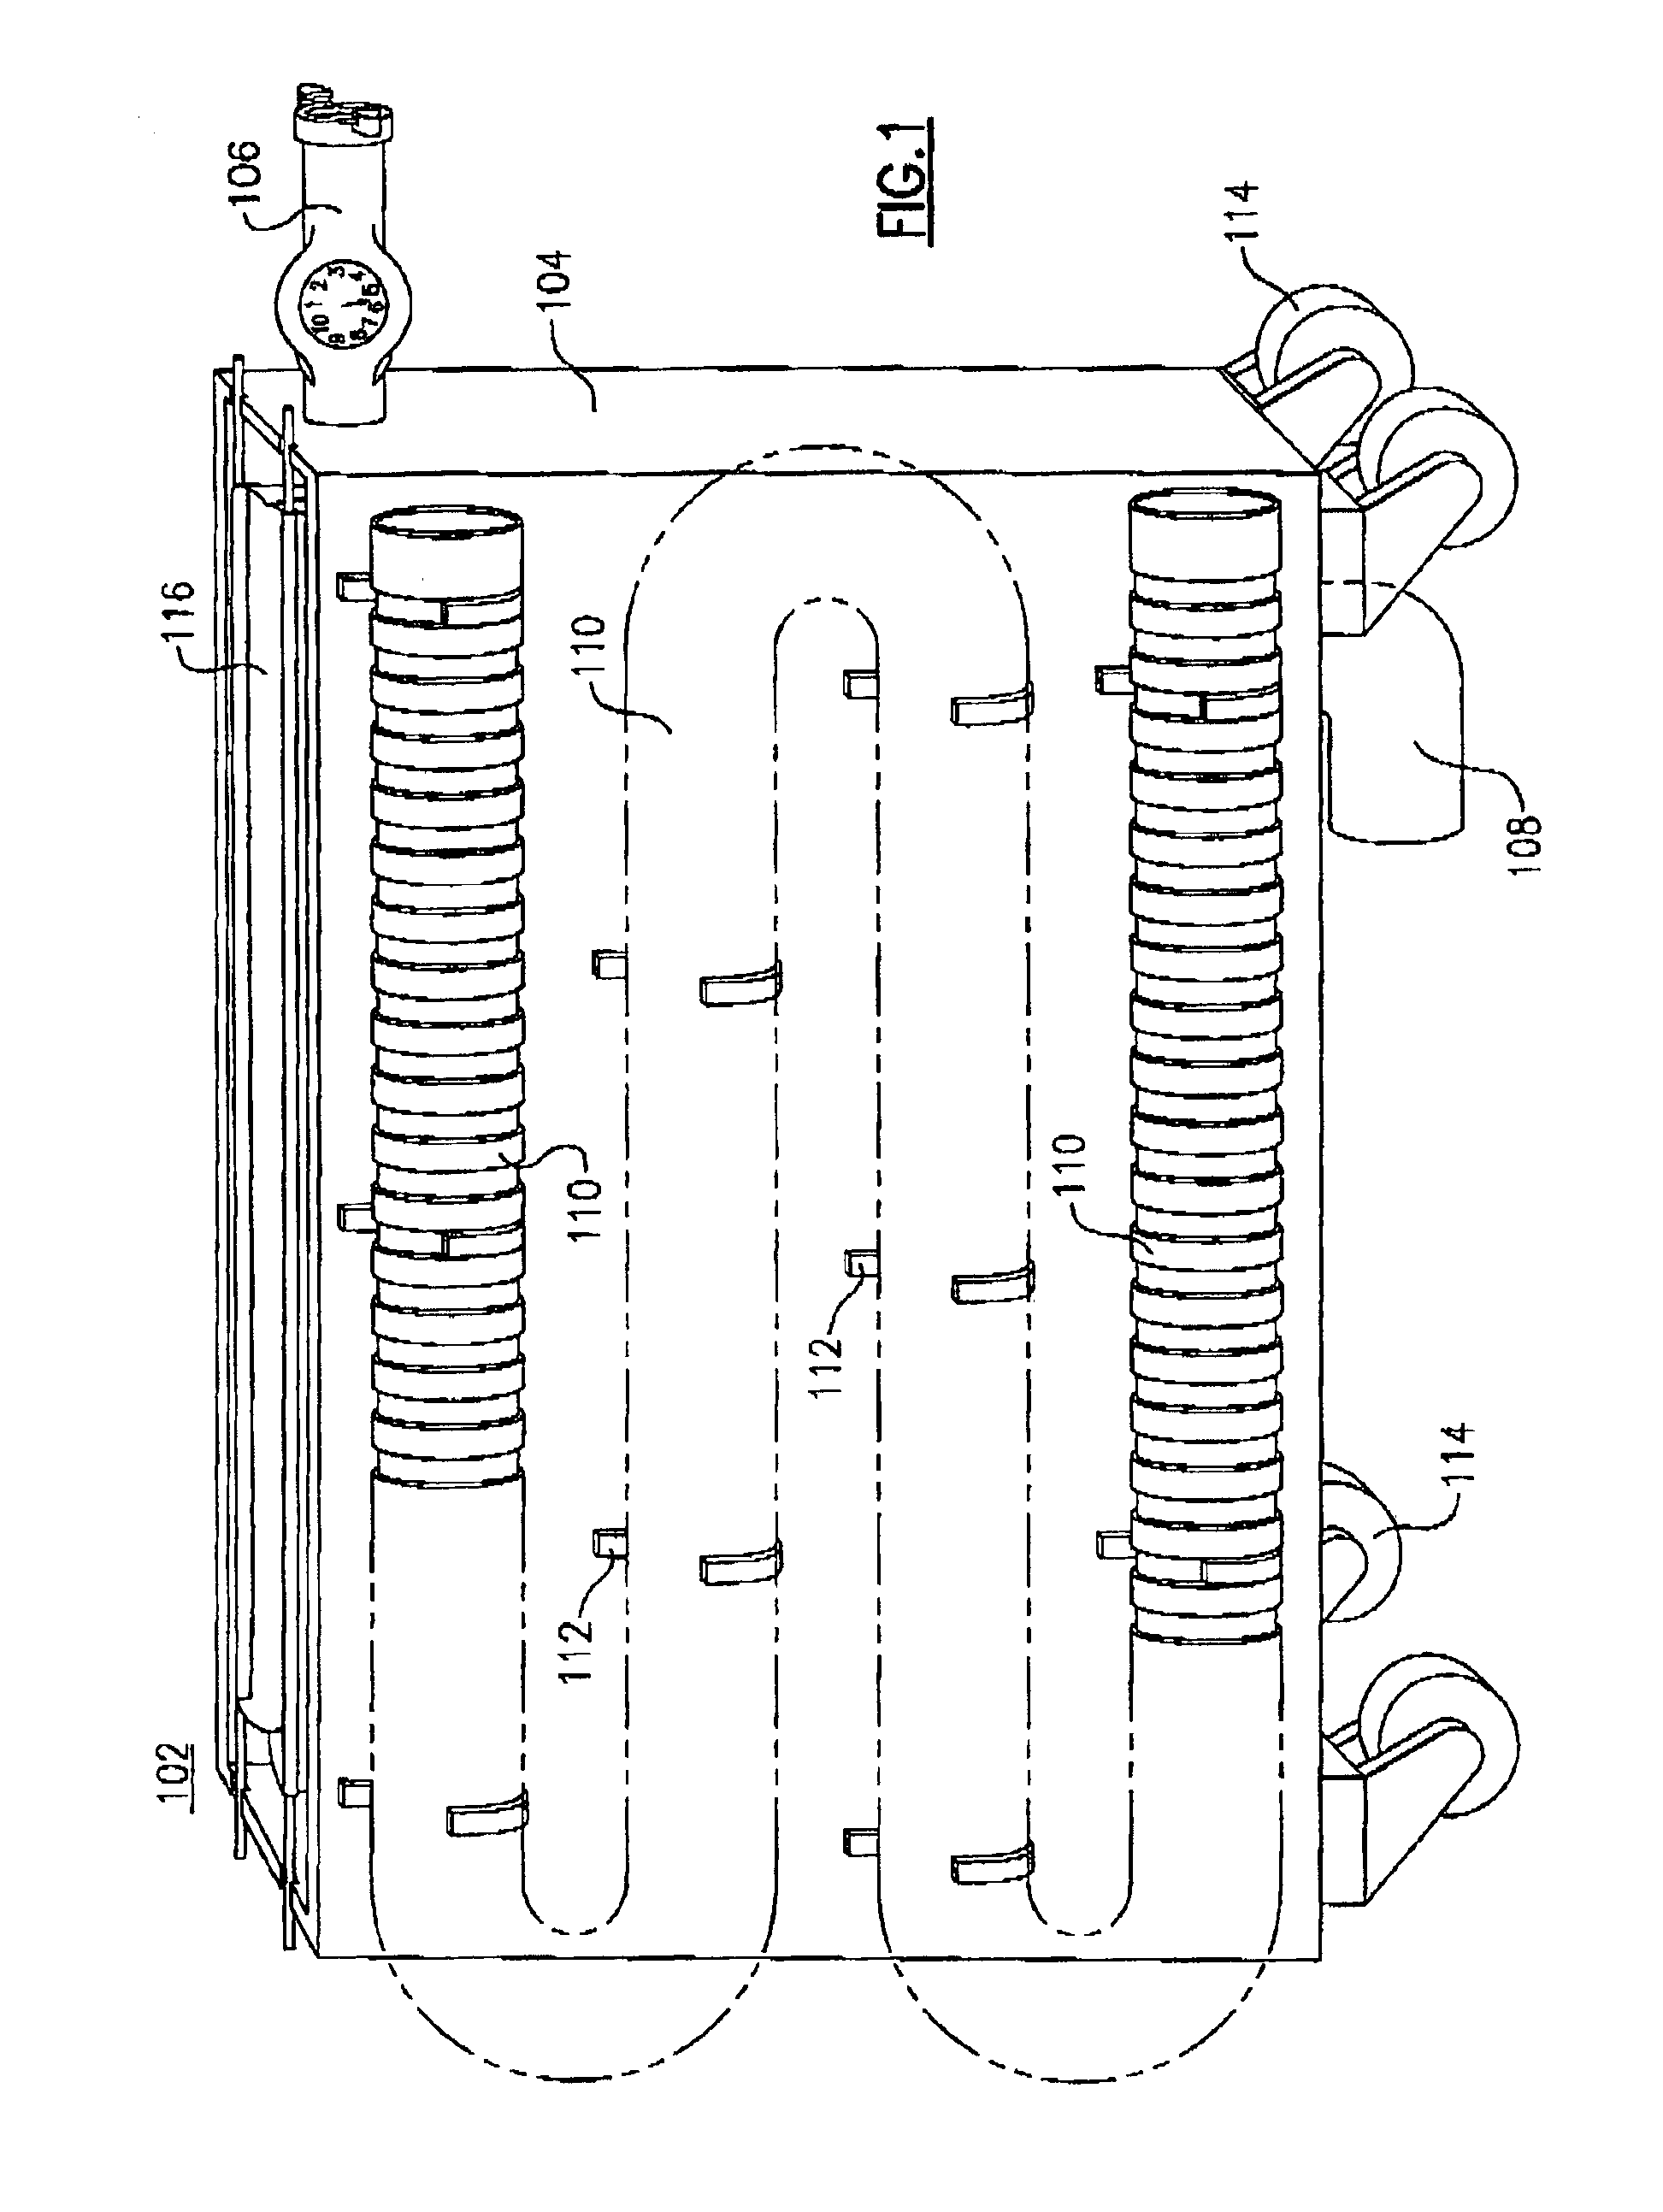 Ballast water treatment systems including related apparatus and methods